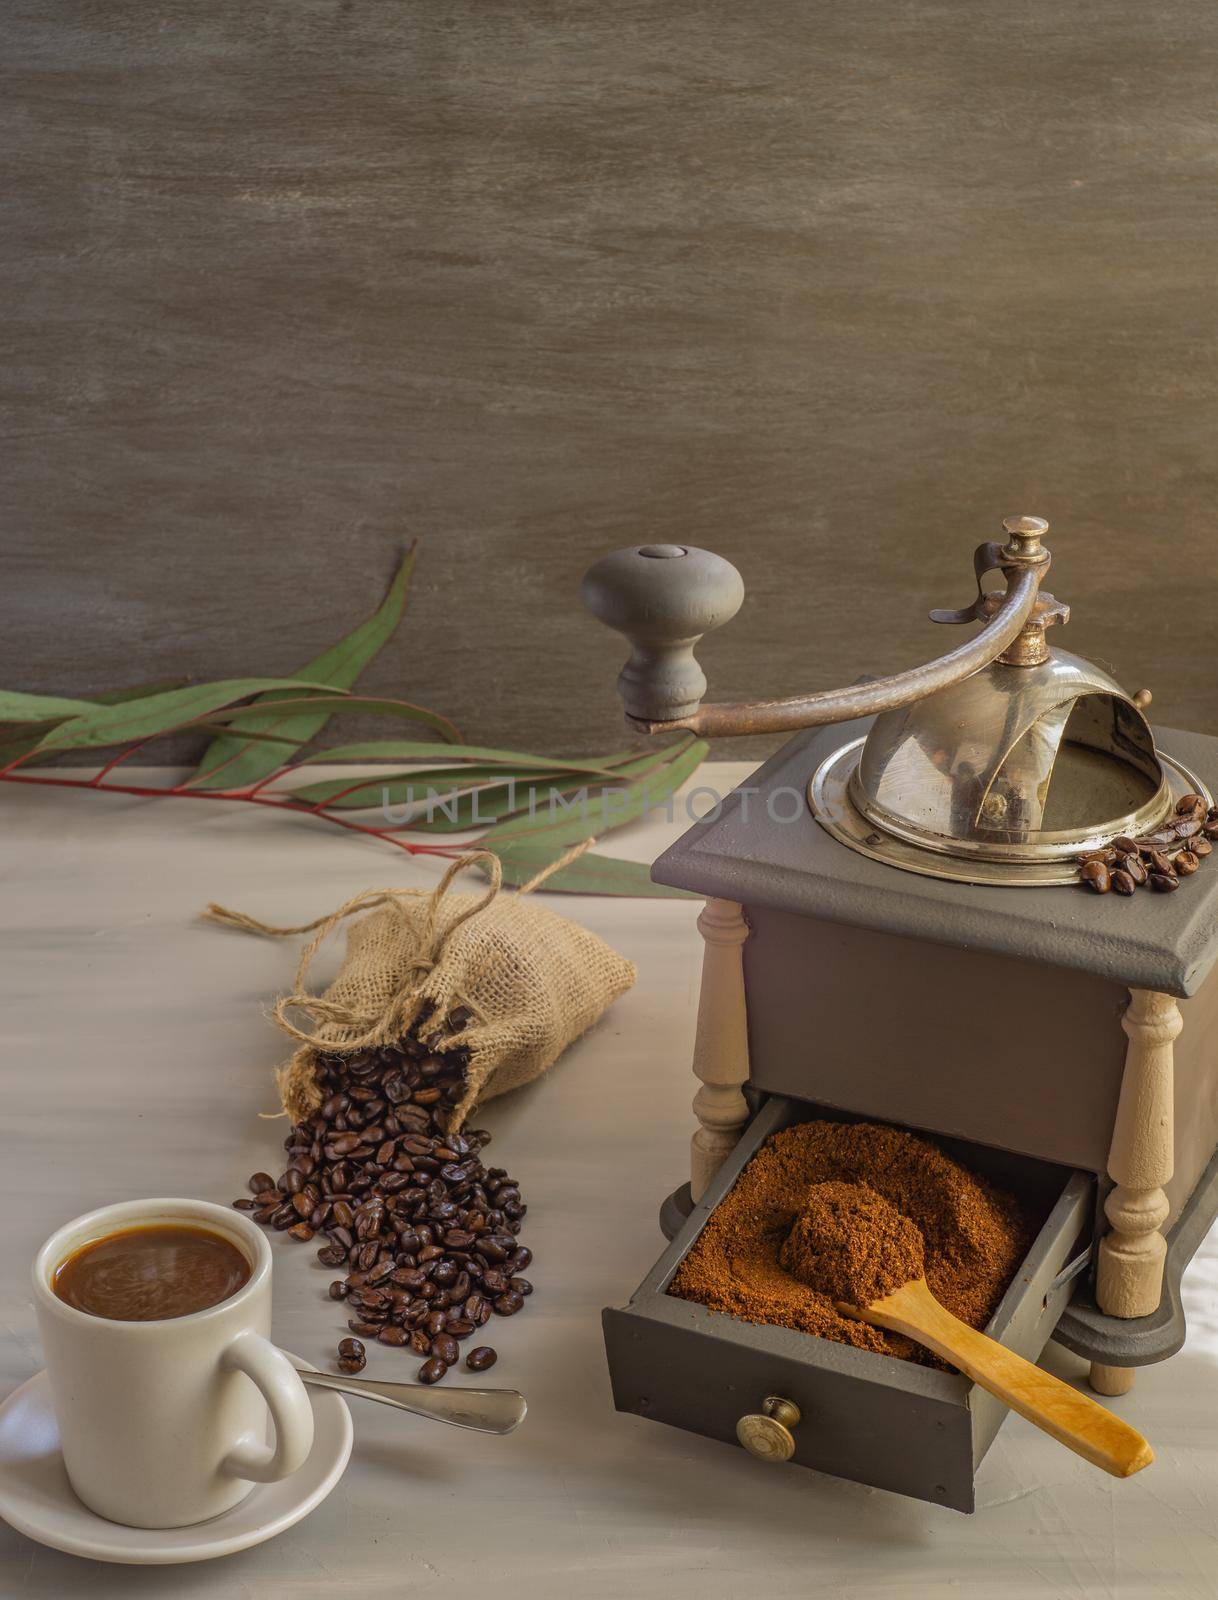 coffee beans and ground coffee with coffee grinder and flowers